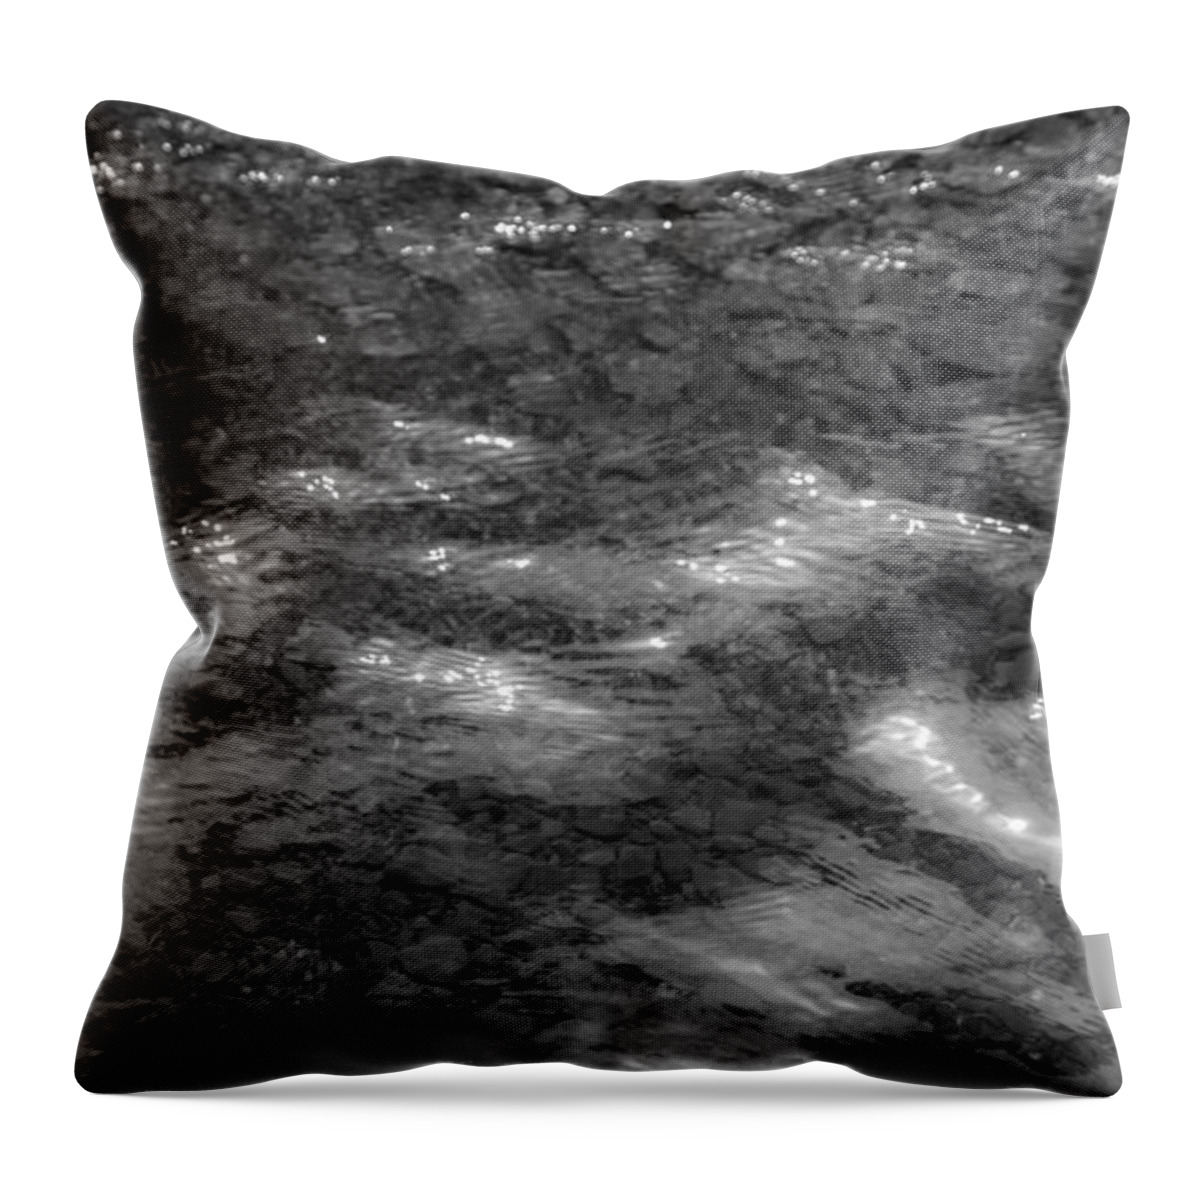 Rocks Throw Pillow featuring the photograph Rocks Water Light Abstract by Photographic Arts And Design Studio